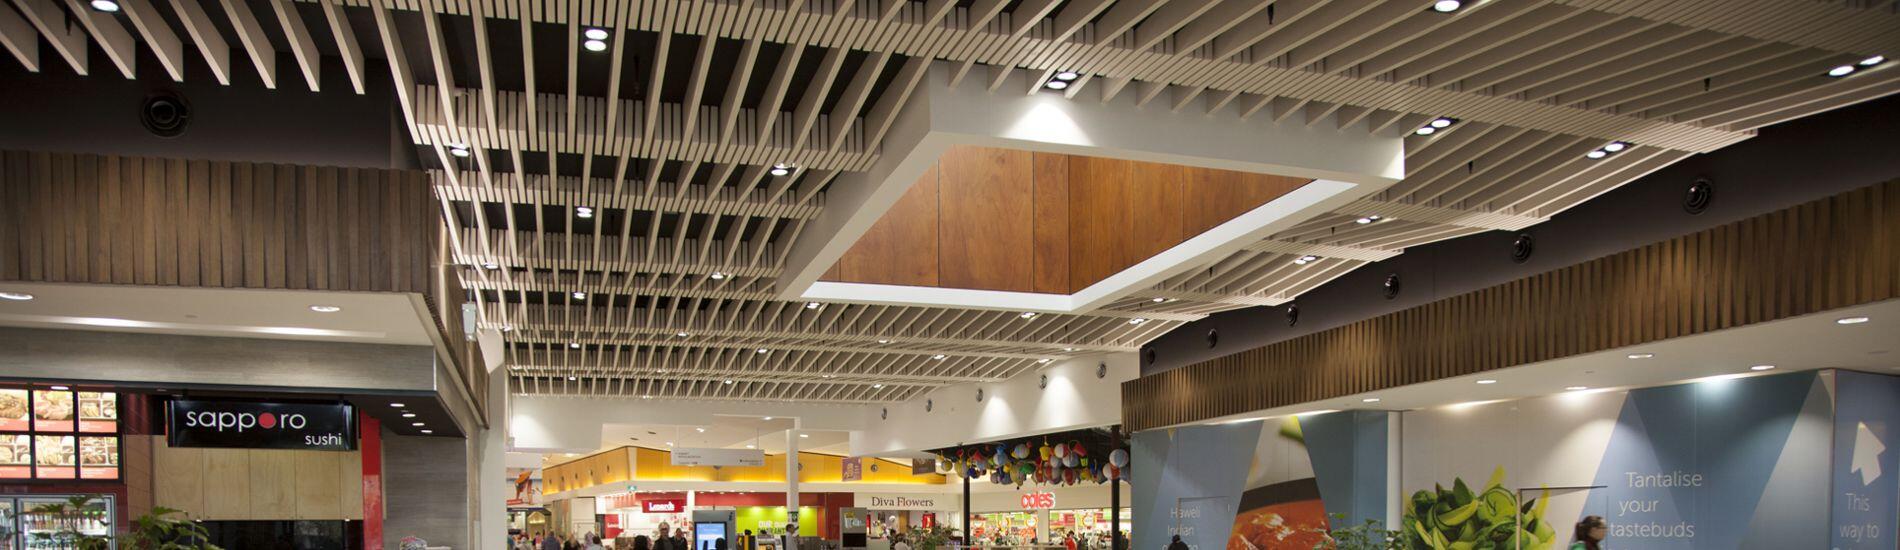 Lightweight MAXI BEAM in Multiple Profiles and Acoustic Option Used Extensively Throughout Shopping Centre